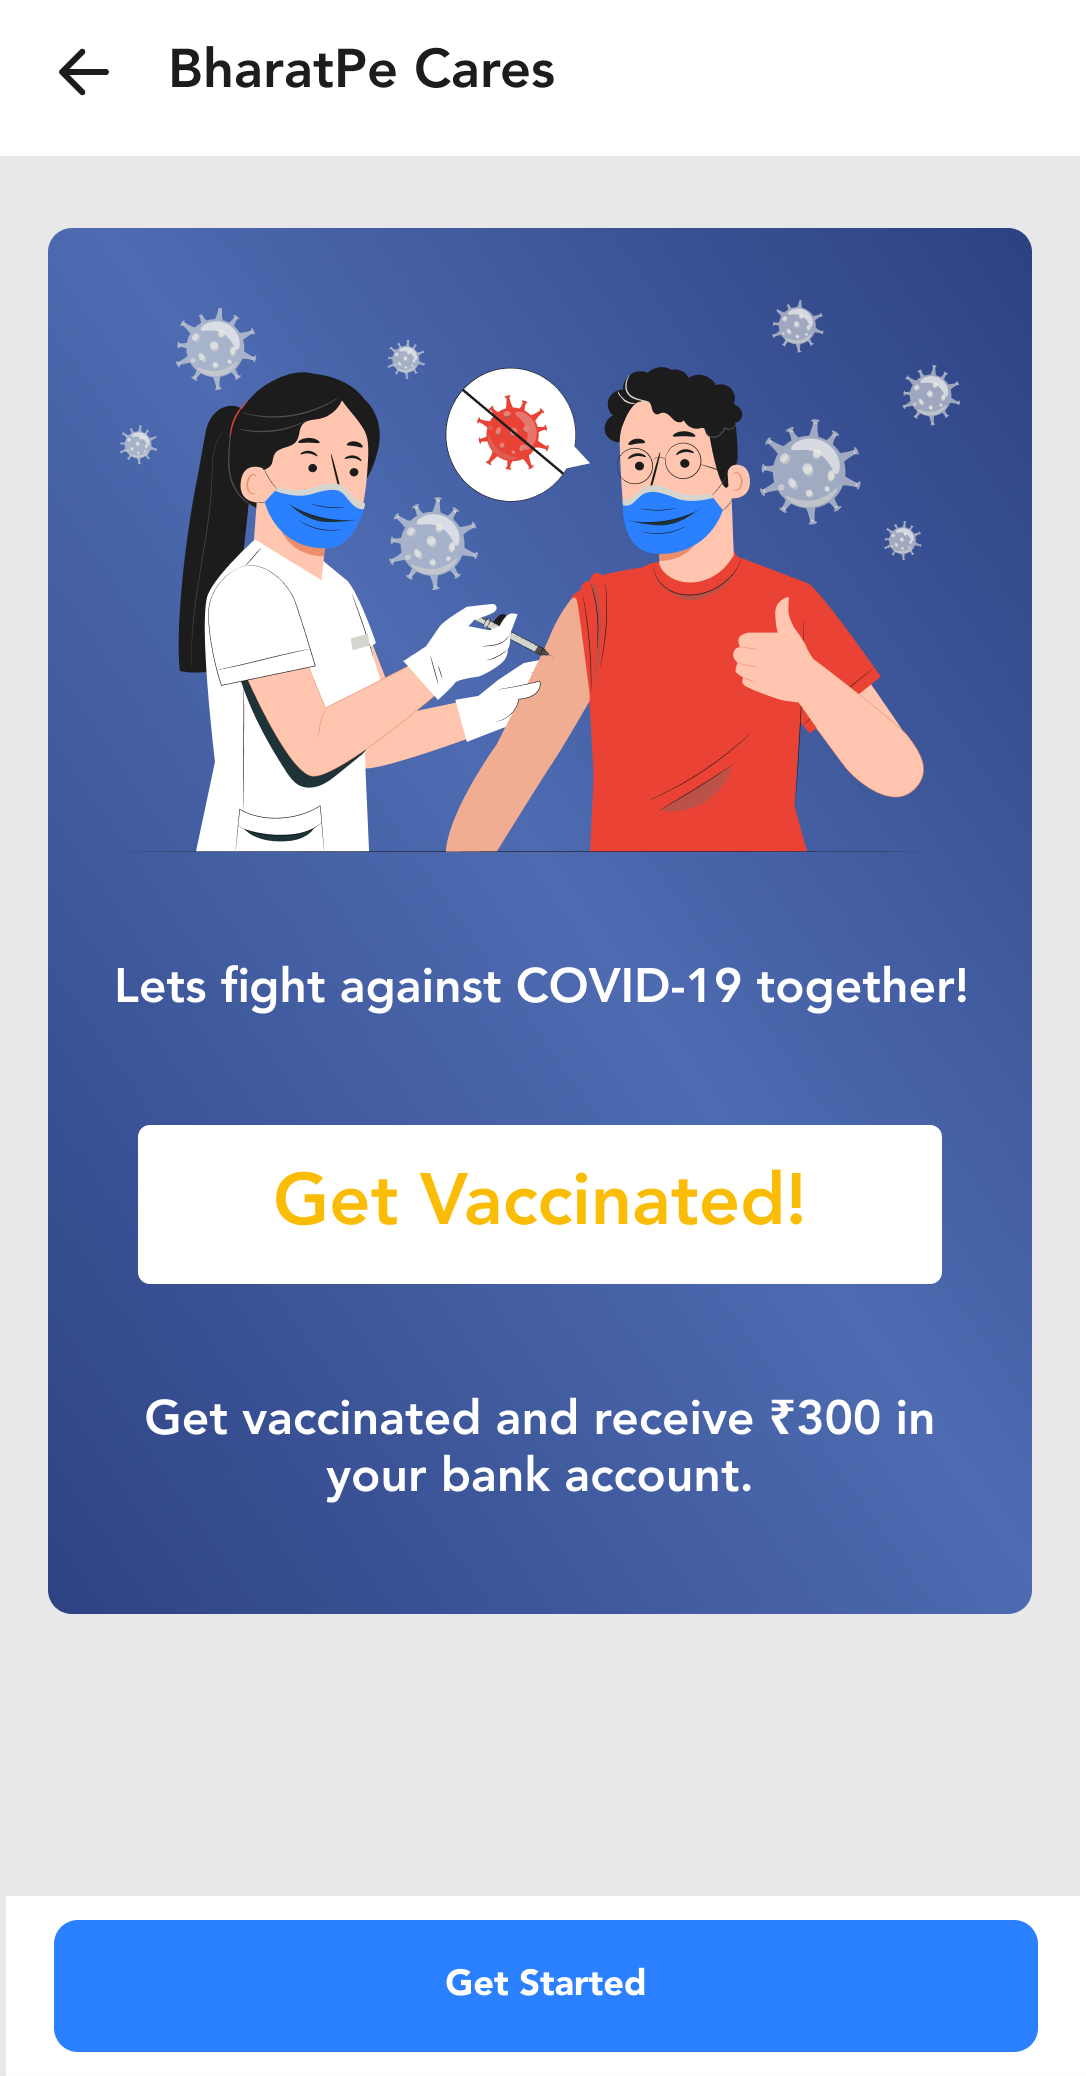 BharatPe launches Covid Vaccination Cashback: Rolls out initiative to encourage Covid-19 vaccination for merchants